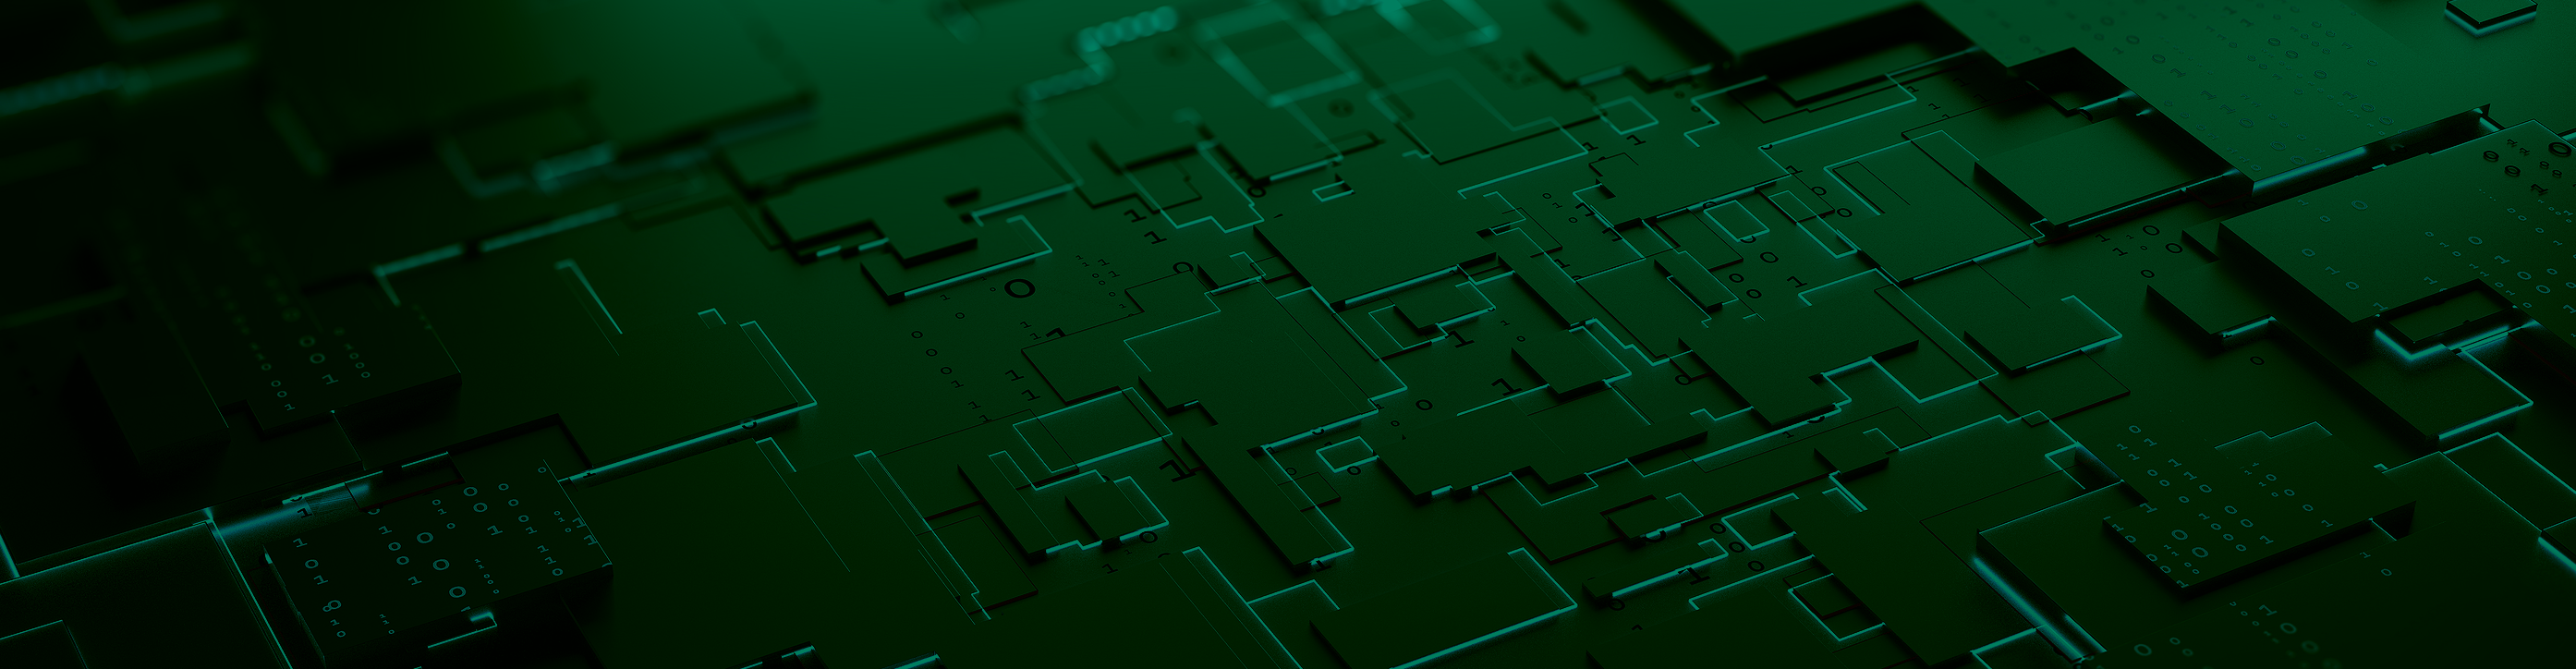 Image of a dark green chipset.